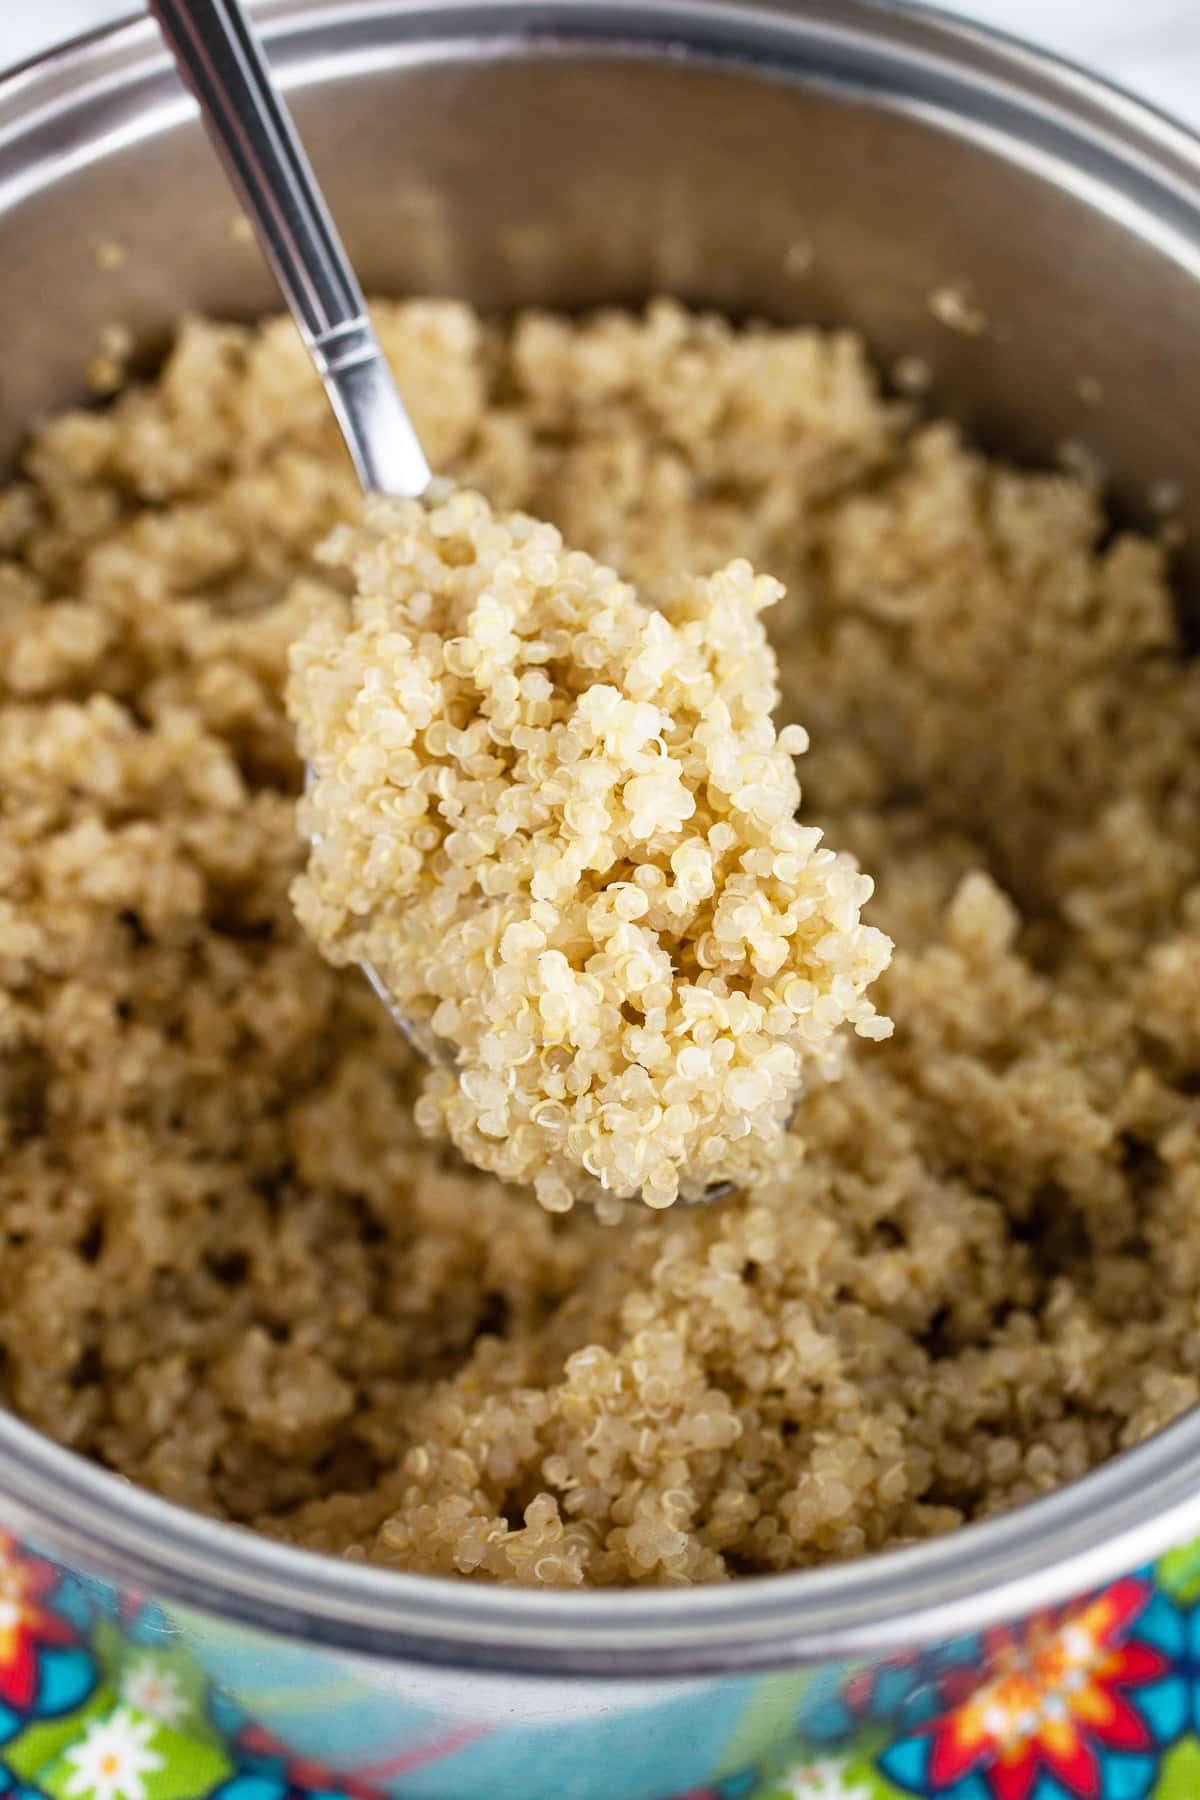 Scoop of cooked quinoa lifted from sauce pan with spoon.